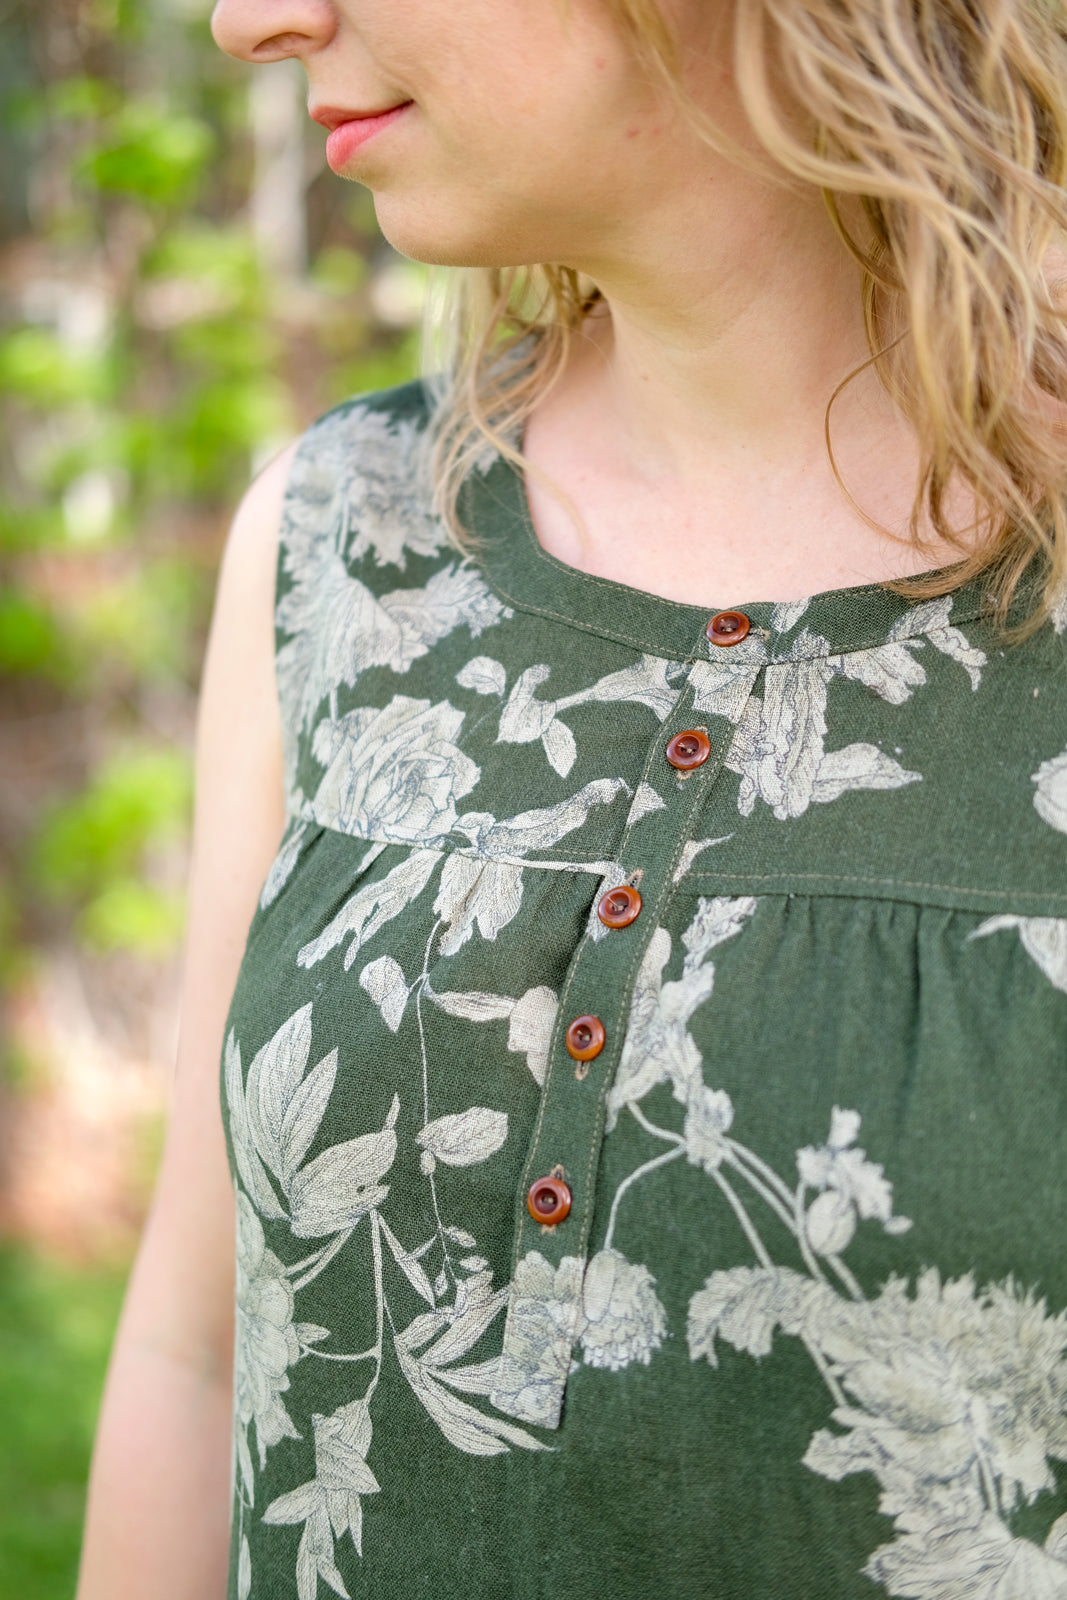 Partial Placket Detail on Amber's Green Floral Linen Brome Maxi Dress